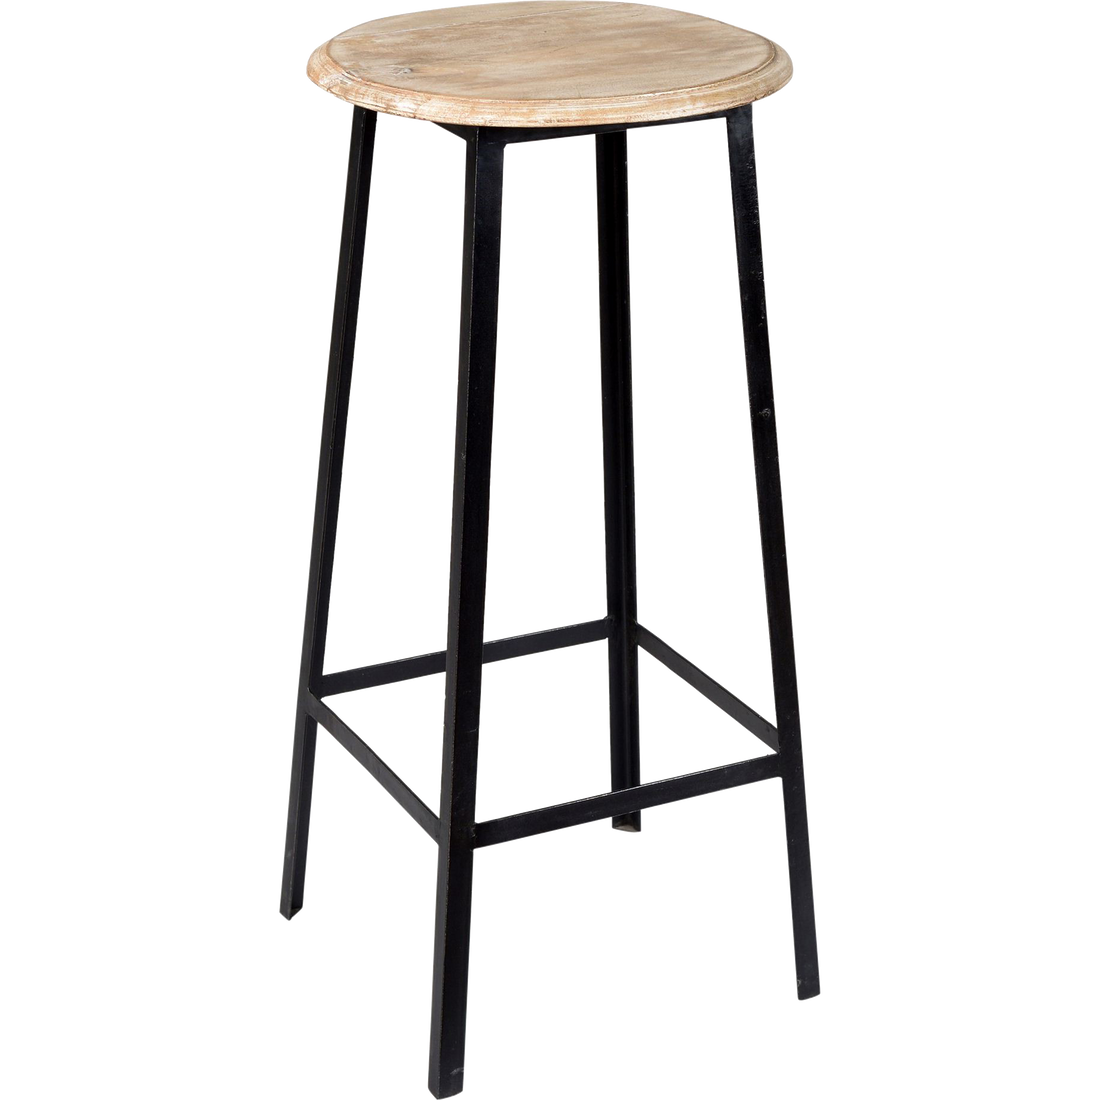 Trademark Living Holly bar stool with wooden seat